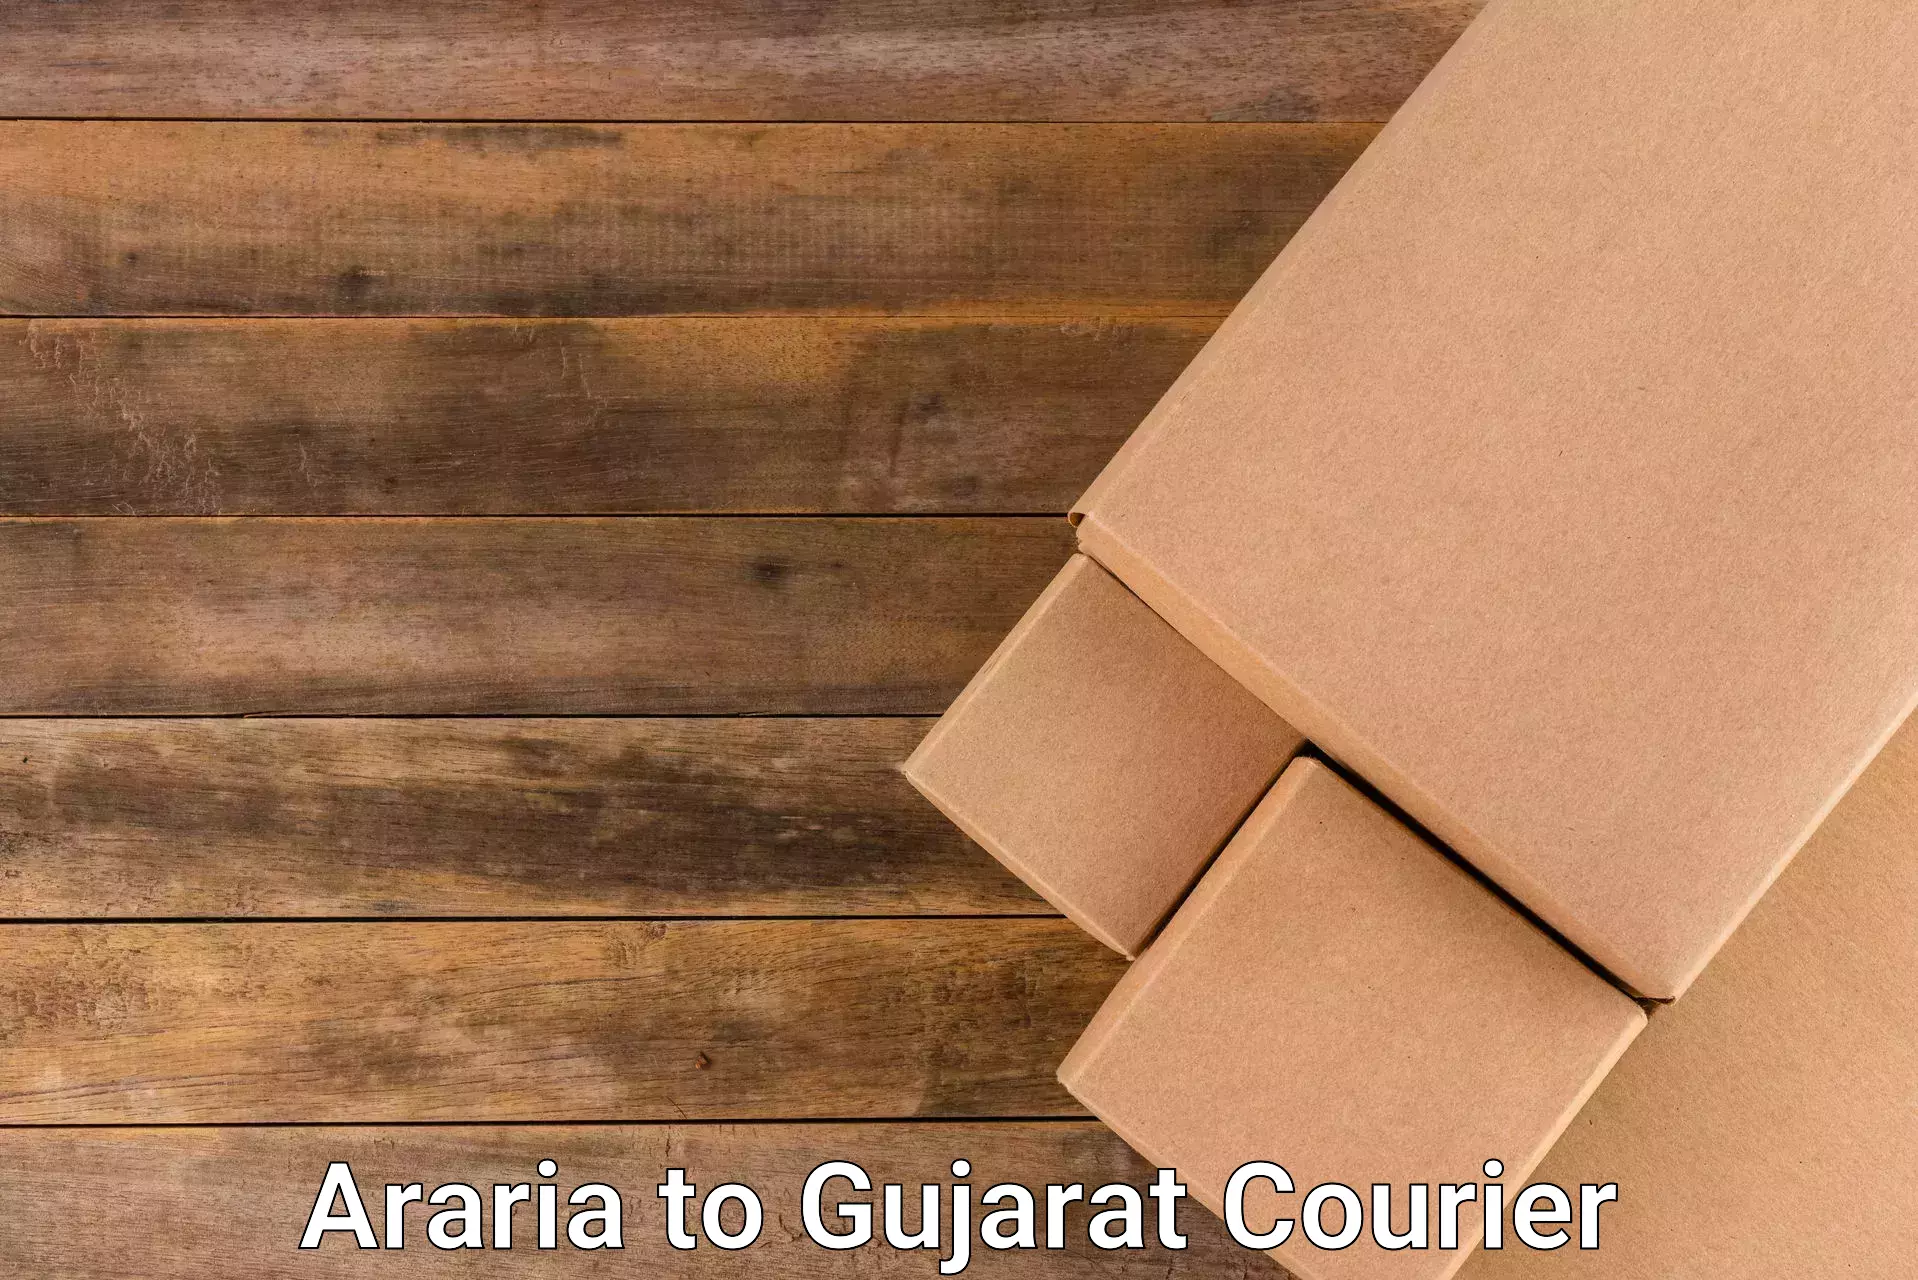 24-hour courier services Araria to Dholera